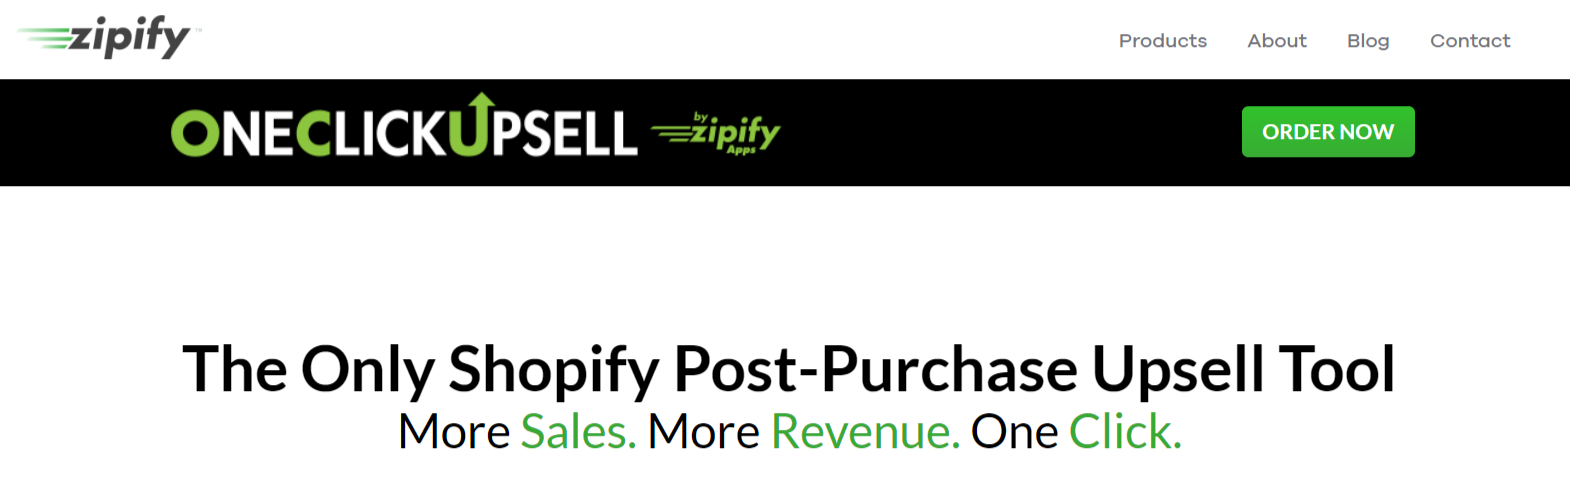 Zipify Review- One Click Upsells